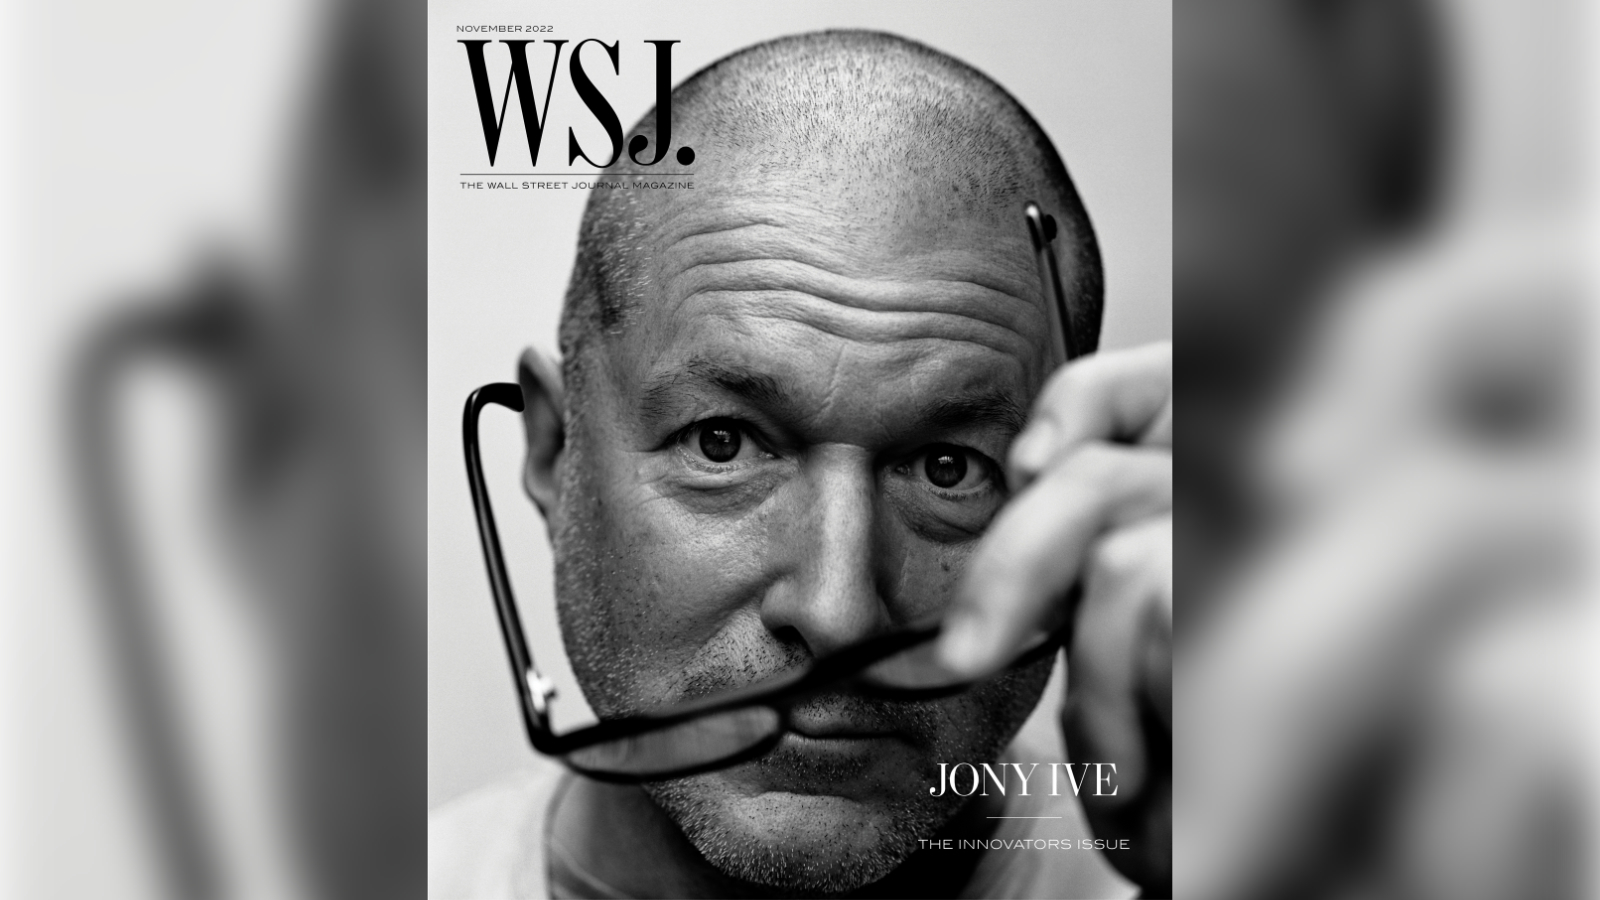 Jony Ive Featured on WSJ. Magazine Cover, Talks Work at Apple and Design Philosophy